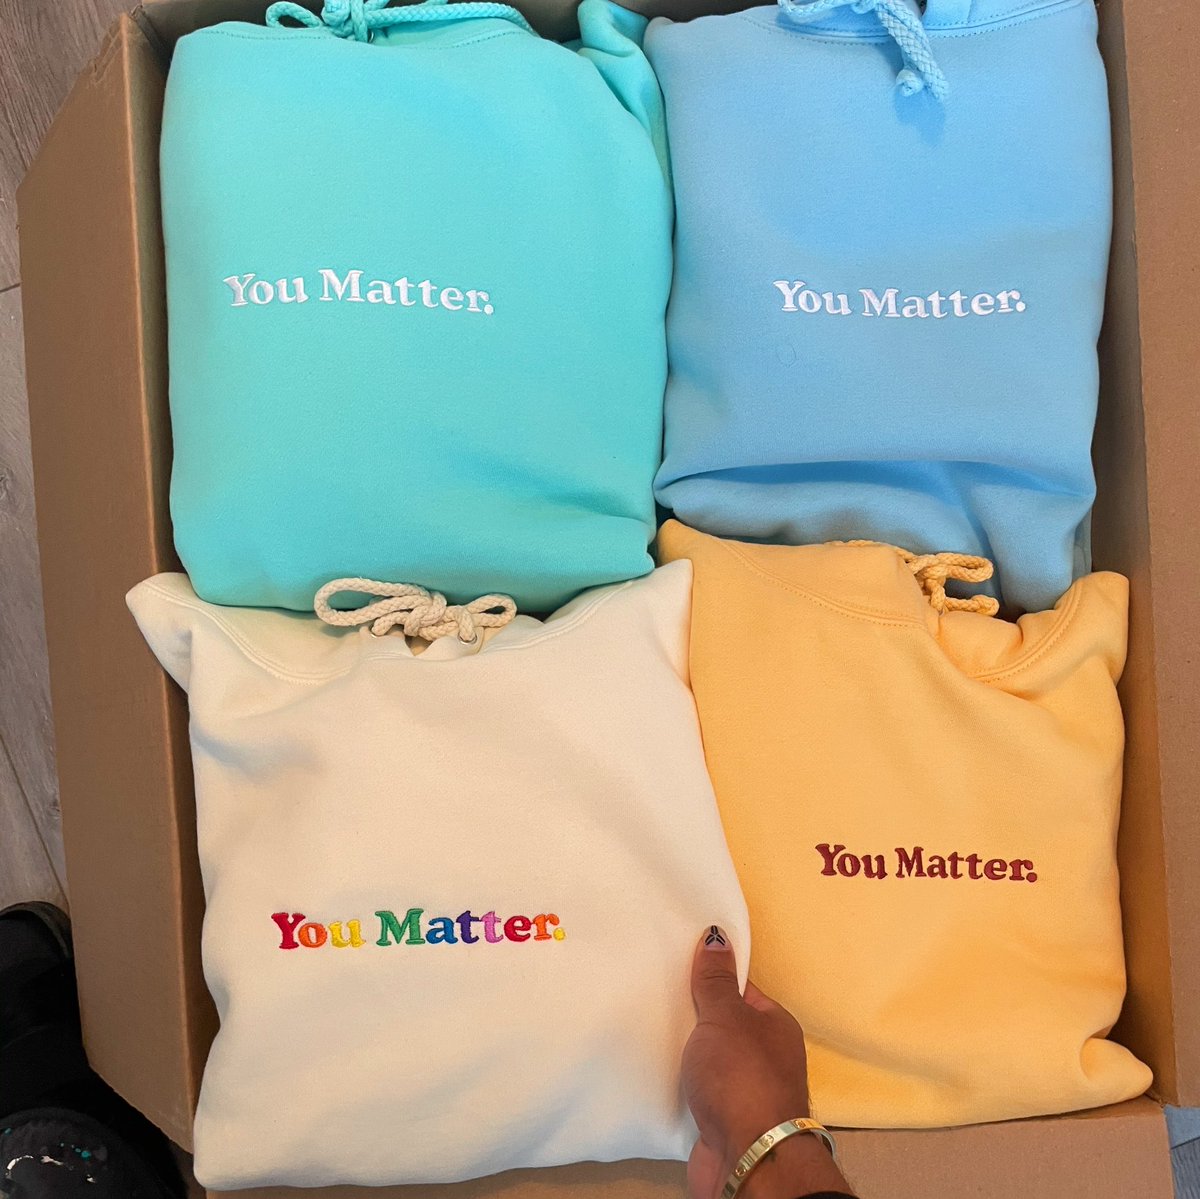 ‘you matter’ spring collection
the return of your favorite hoodies
available april 18th @ 10:15 PM est
youmatter.com